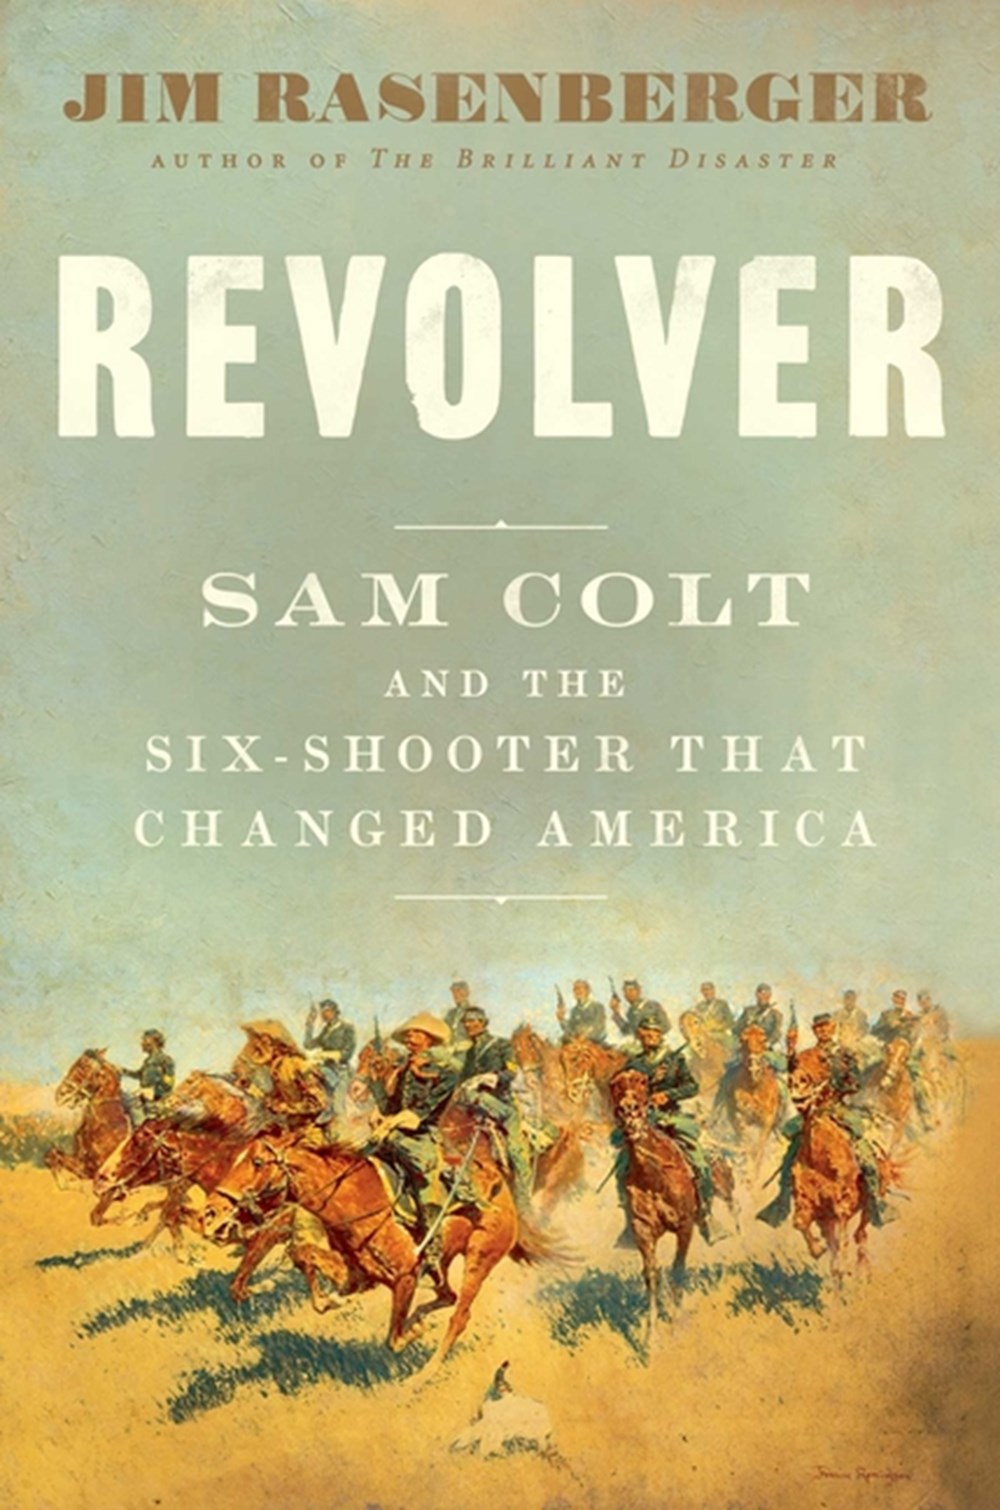 Revolver Sam Colt and the Six-Shooter That Changed America